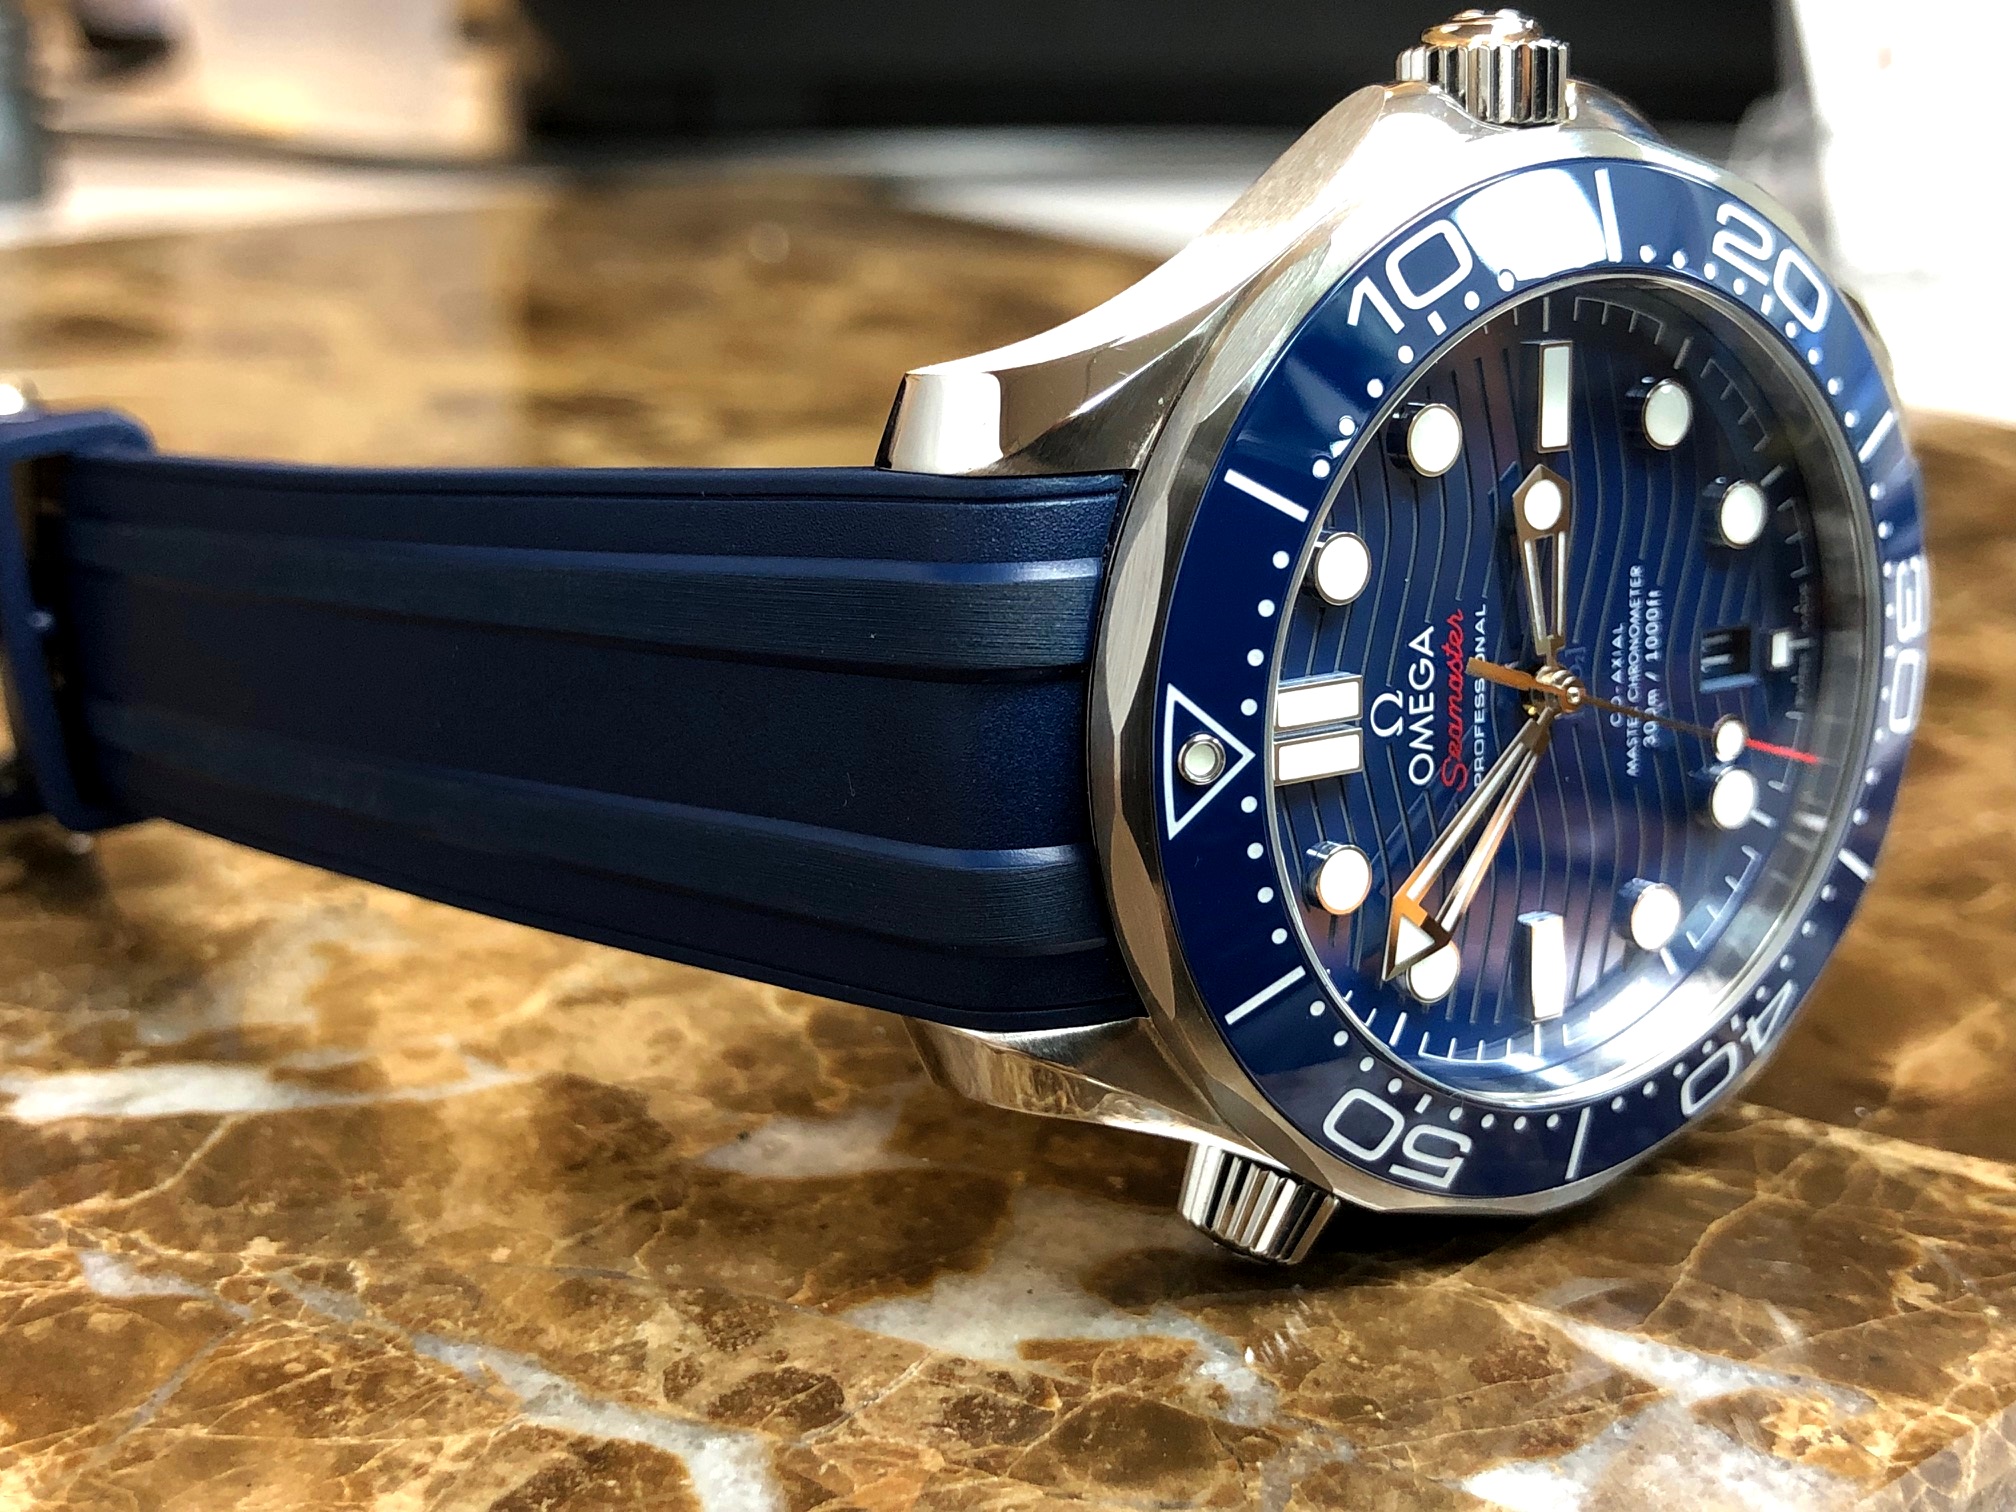 Omega Seamaster Diver 300m Omega Co Axial Master 42 Mm Blue Wave Rubber Strap Box Papers 210 32 42 20 03 001 Sansom Watches Rolex Breitling Omega And More